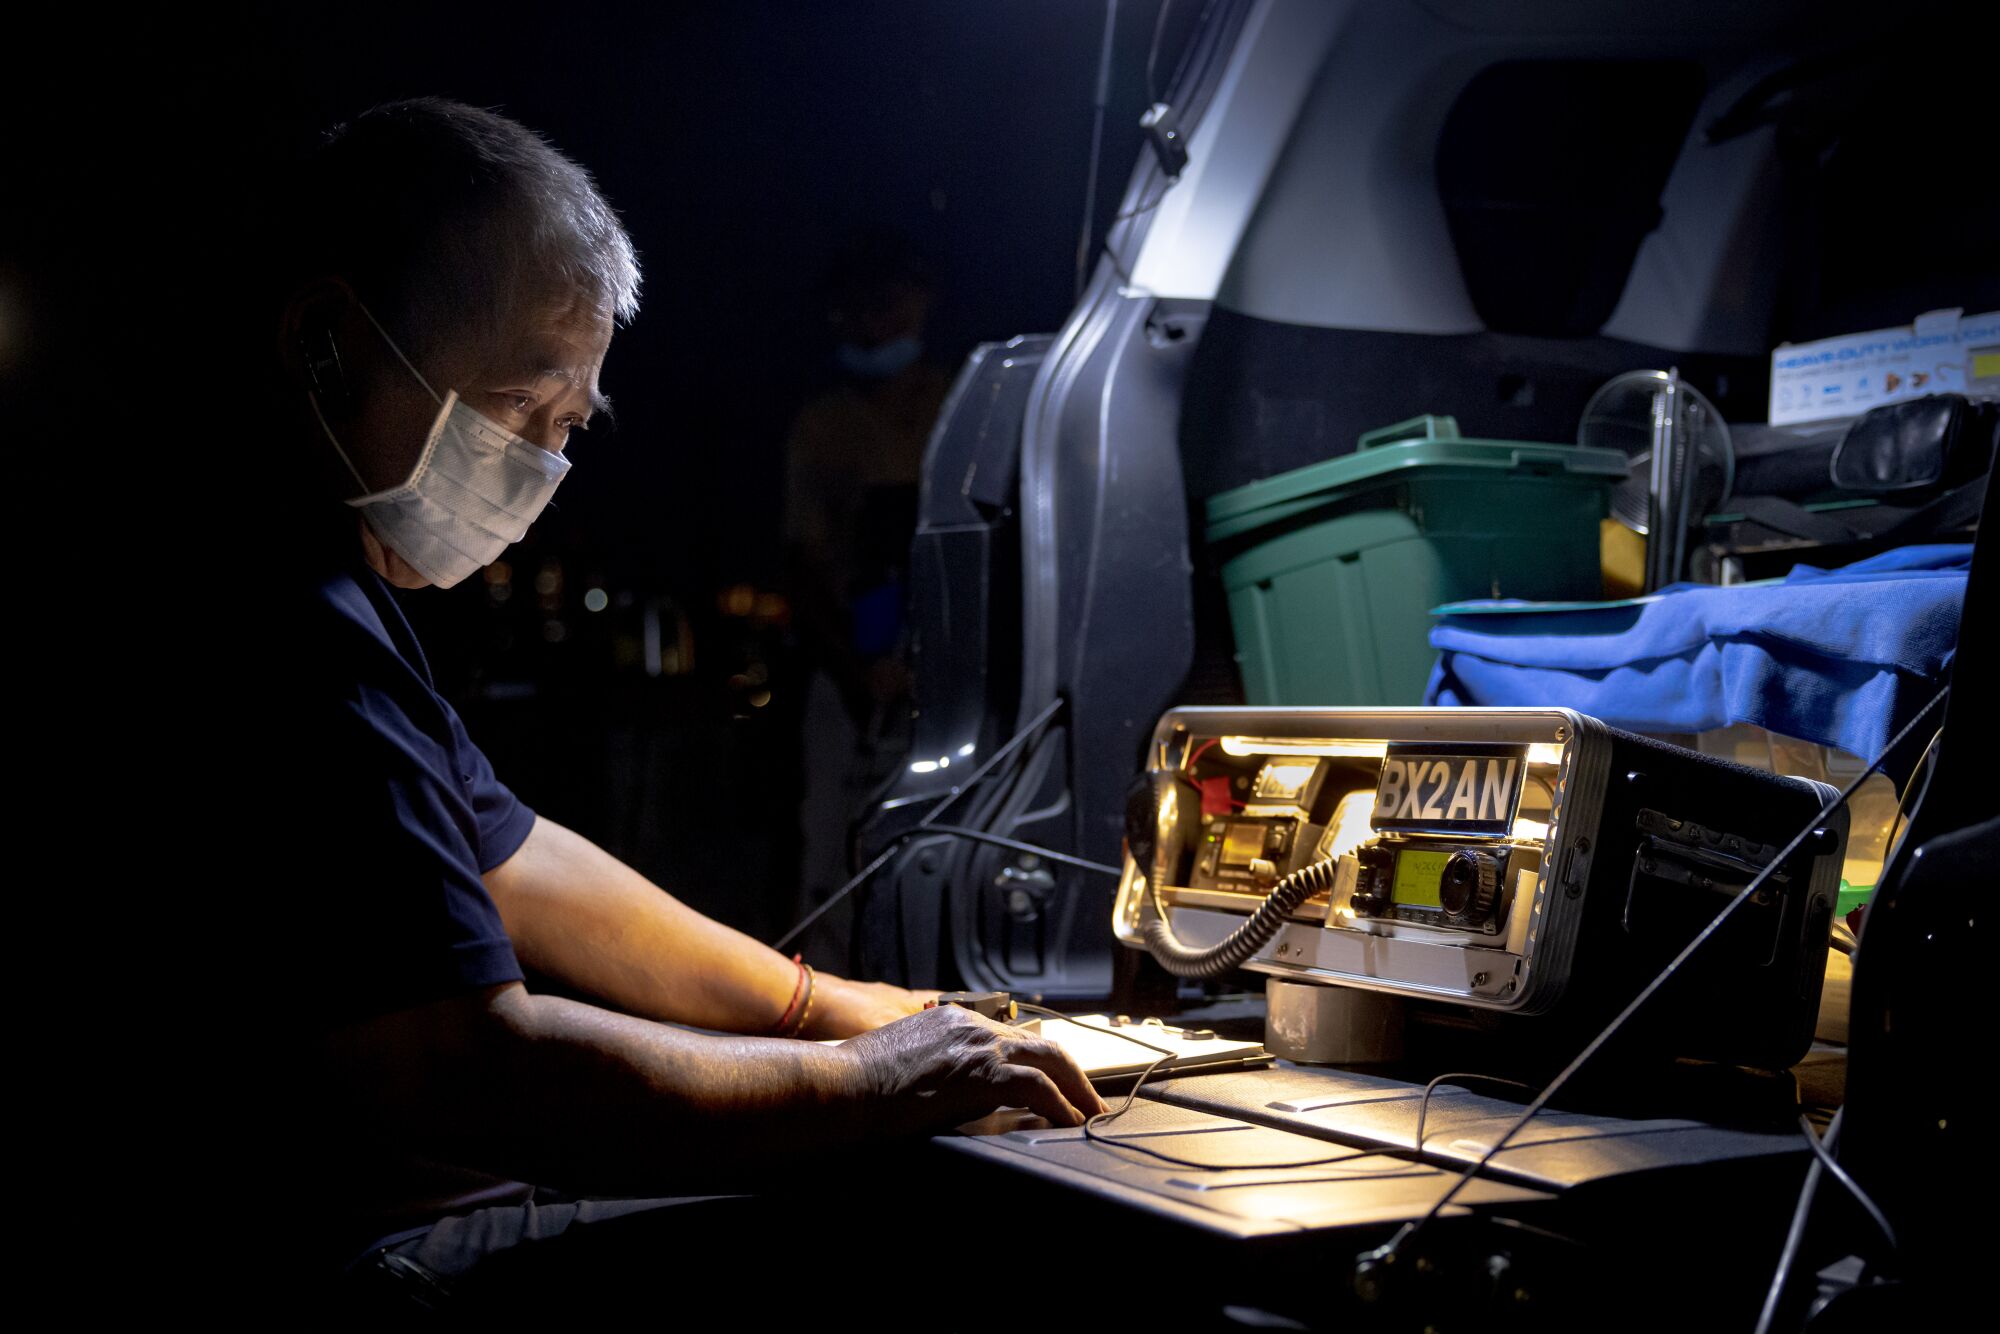 A masked man seated outside the open trunk of a van looks at a machine with the word "BX2AN" on the top right corner.